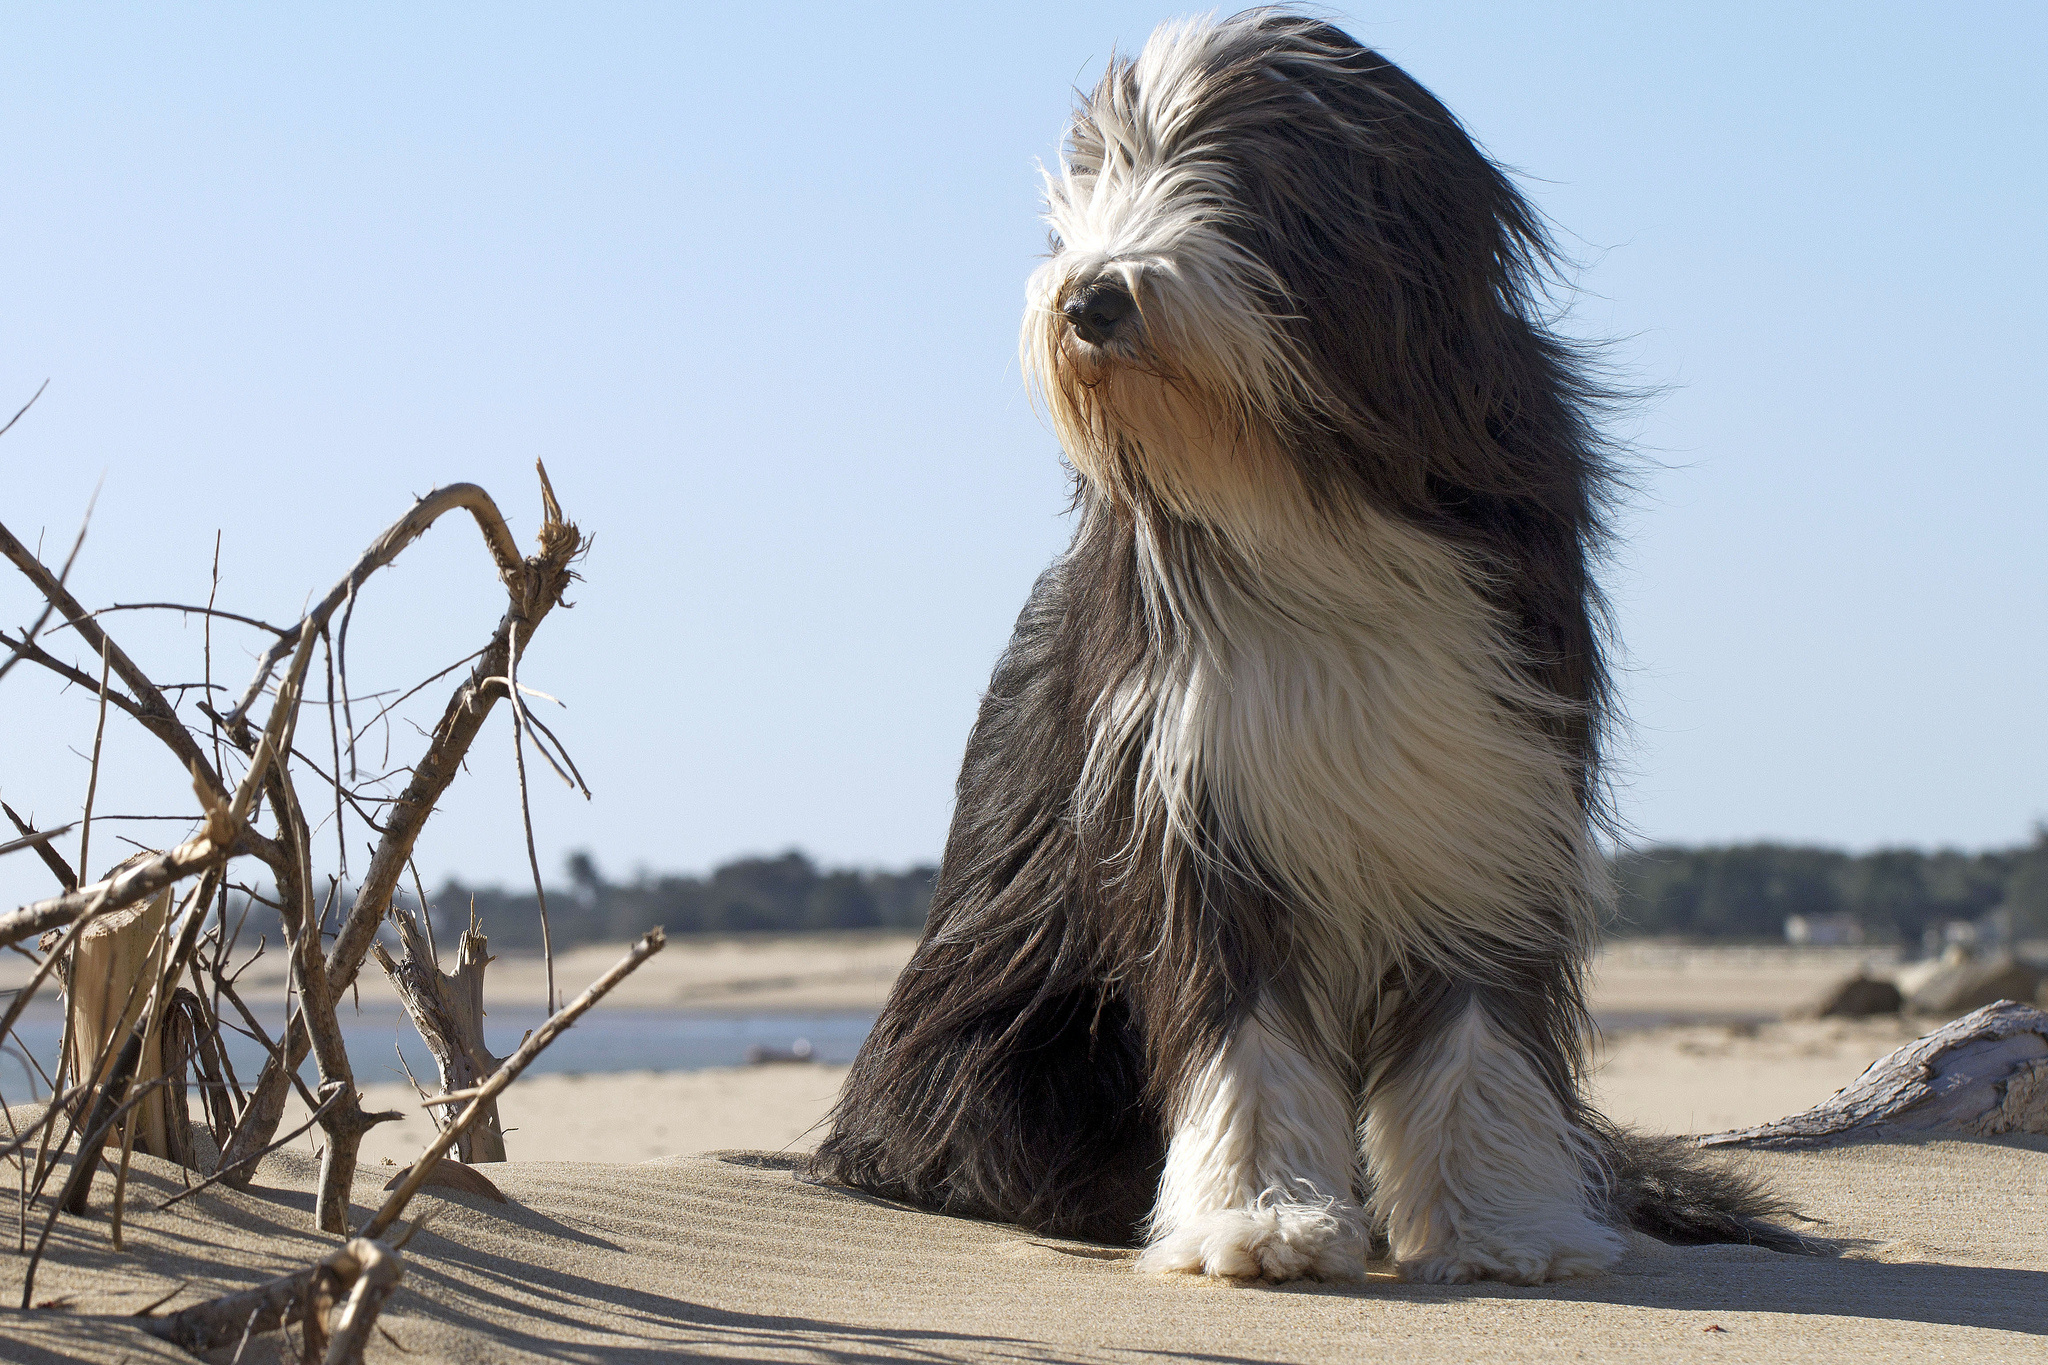 Dogs on the beach wallpaper, Sunny vibes, Sand and waves, Playful pets, 2050x1370 HD Desktop